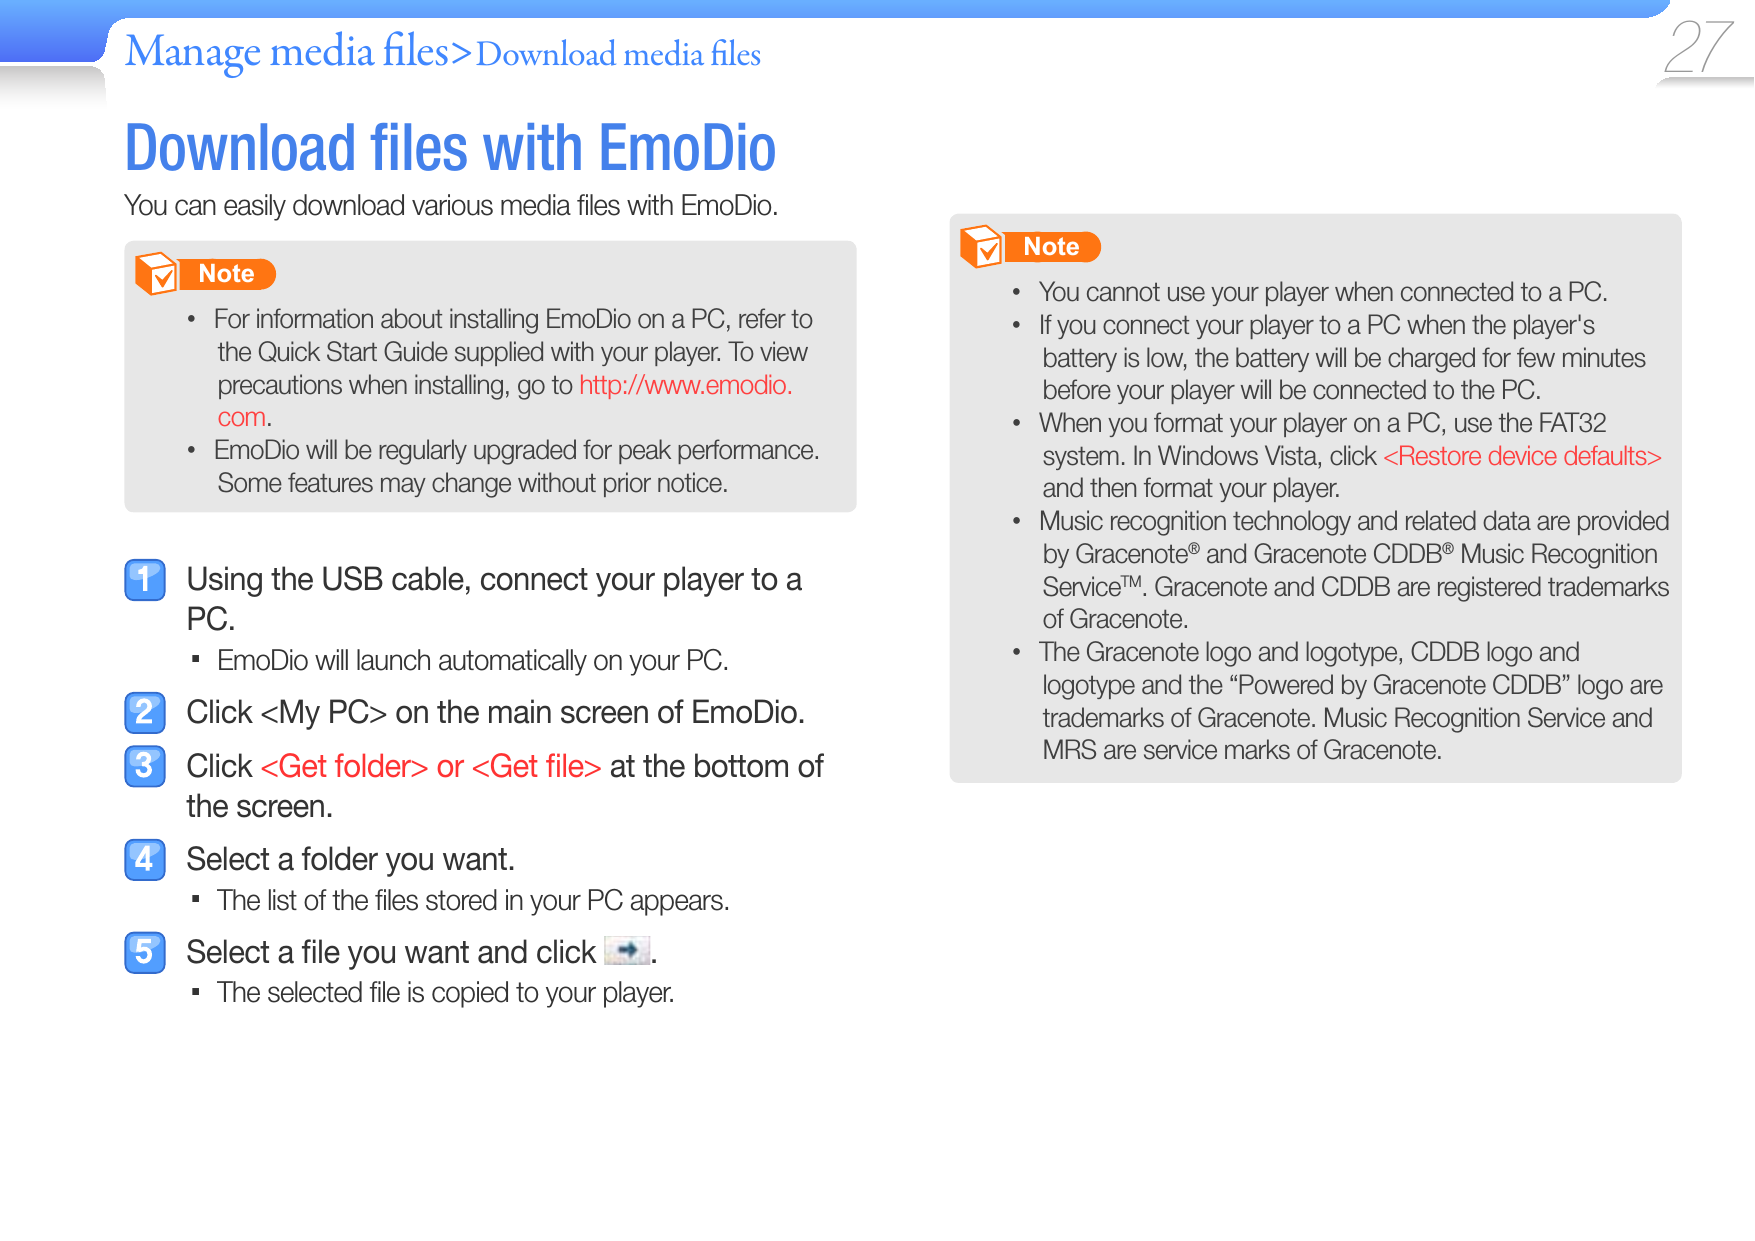 Manage media  les&gt;Download media  les 27 Download  ﬁ les with  EmoDioYou can easily download various media ﬁ les with EmoDio.       Note   For information about installing EmoDio on a PC, refer to • the Quick Start Guide supplied with your player. To view precautions when installing, go to http://www.emodio.com.EmoDio will be regularly upgraded for peak performance. • Some features may change without prior notice.  Using the USB cable, connect your player to a PC.EmoDio will launch automatically on your PC.   Click &lt;My PC&gt; on the main screen of EmoDio. Click &lt;Get folder&gt; or &lt;Get ﬁ le&gt; at the bottom of the screen.   Select a folder you want.The list of the ﬁ les stored in your PC appears.   Select a ﬁ le you want and click  .The selected ﬁ le is copied to your player.        Note   You cannot use your player when connected to a PC.• If you connect your player to a PC when the player&apos;s • battery is low, the battery will be charged for few minutes before your player will be connected to the PC.When you format your player on a PC, use the FAT32 • system. In Windows Vista, click &lt;Restore device defaults&gt; and then format your player.Music recognition technology and related data are provided • by Gracenote® and Gracenote CDDB® Music Recognition ServiceTM. Gracenote and CDDB are registered trademarks of Gracenote.The Gracenote logo and logotype, CDDB logo and • logotype and the “Powered by Gracenote CDDB” logo are trademarks of Gracenote. Music Recognition Service and MRS are service marks of Gracenote.